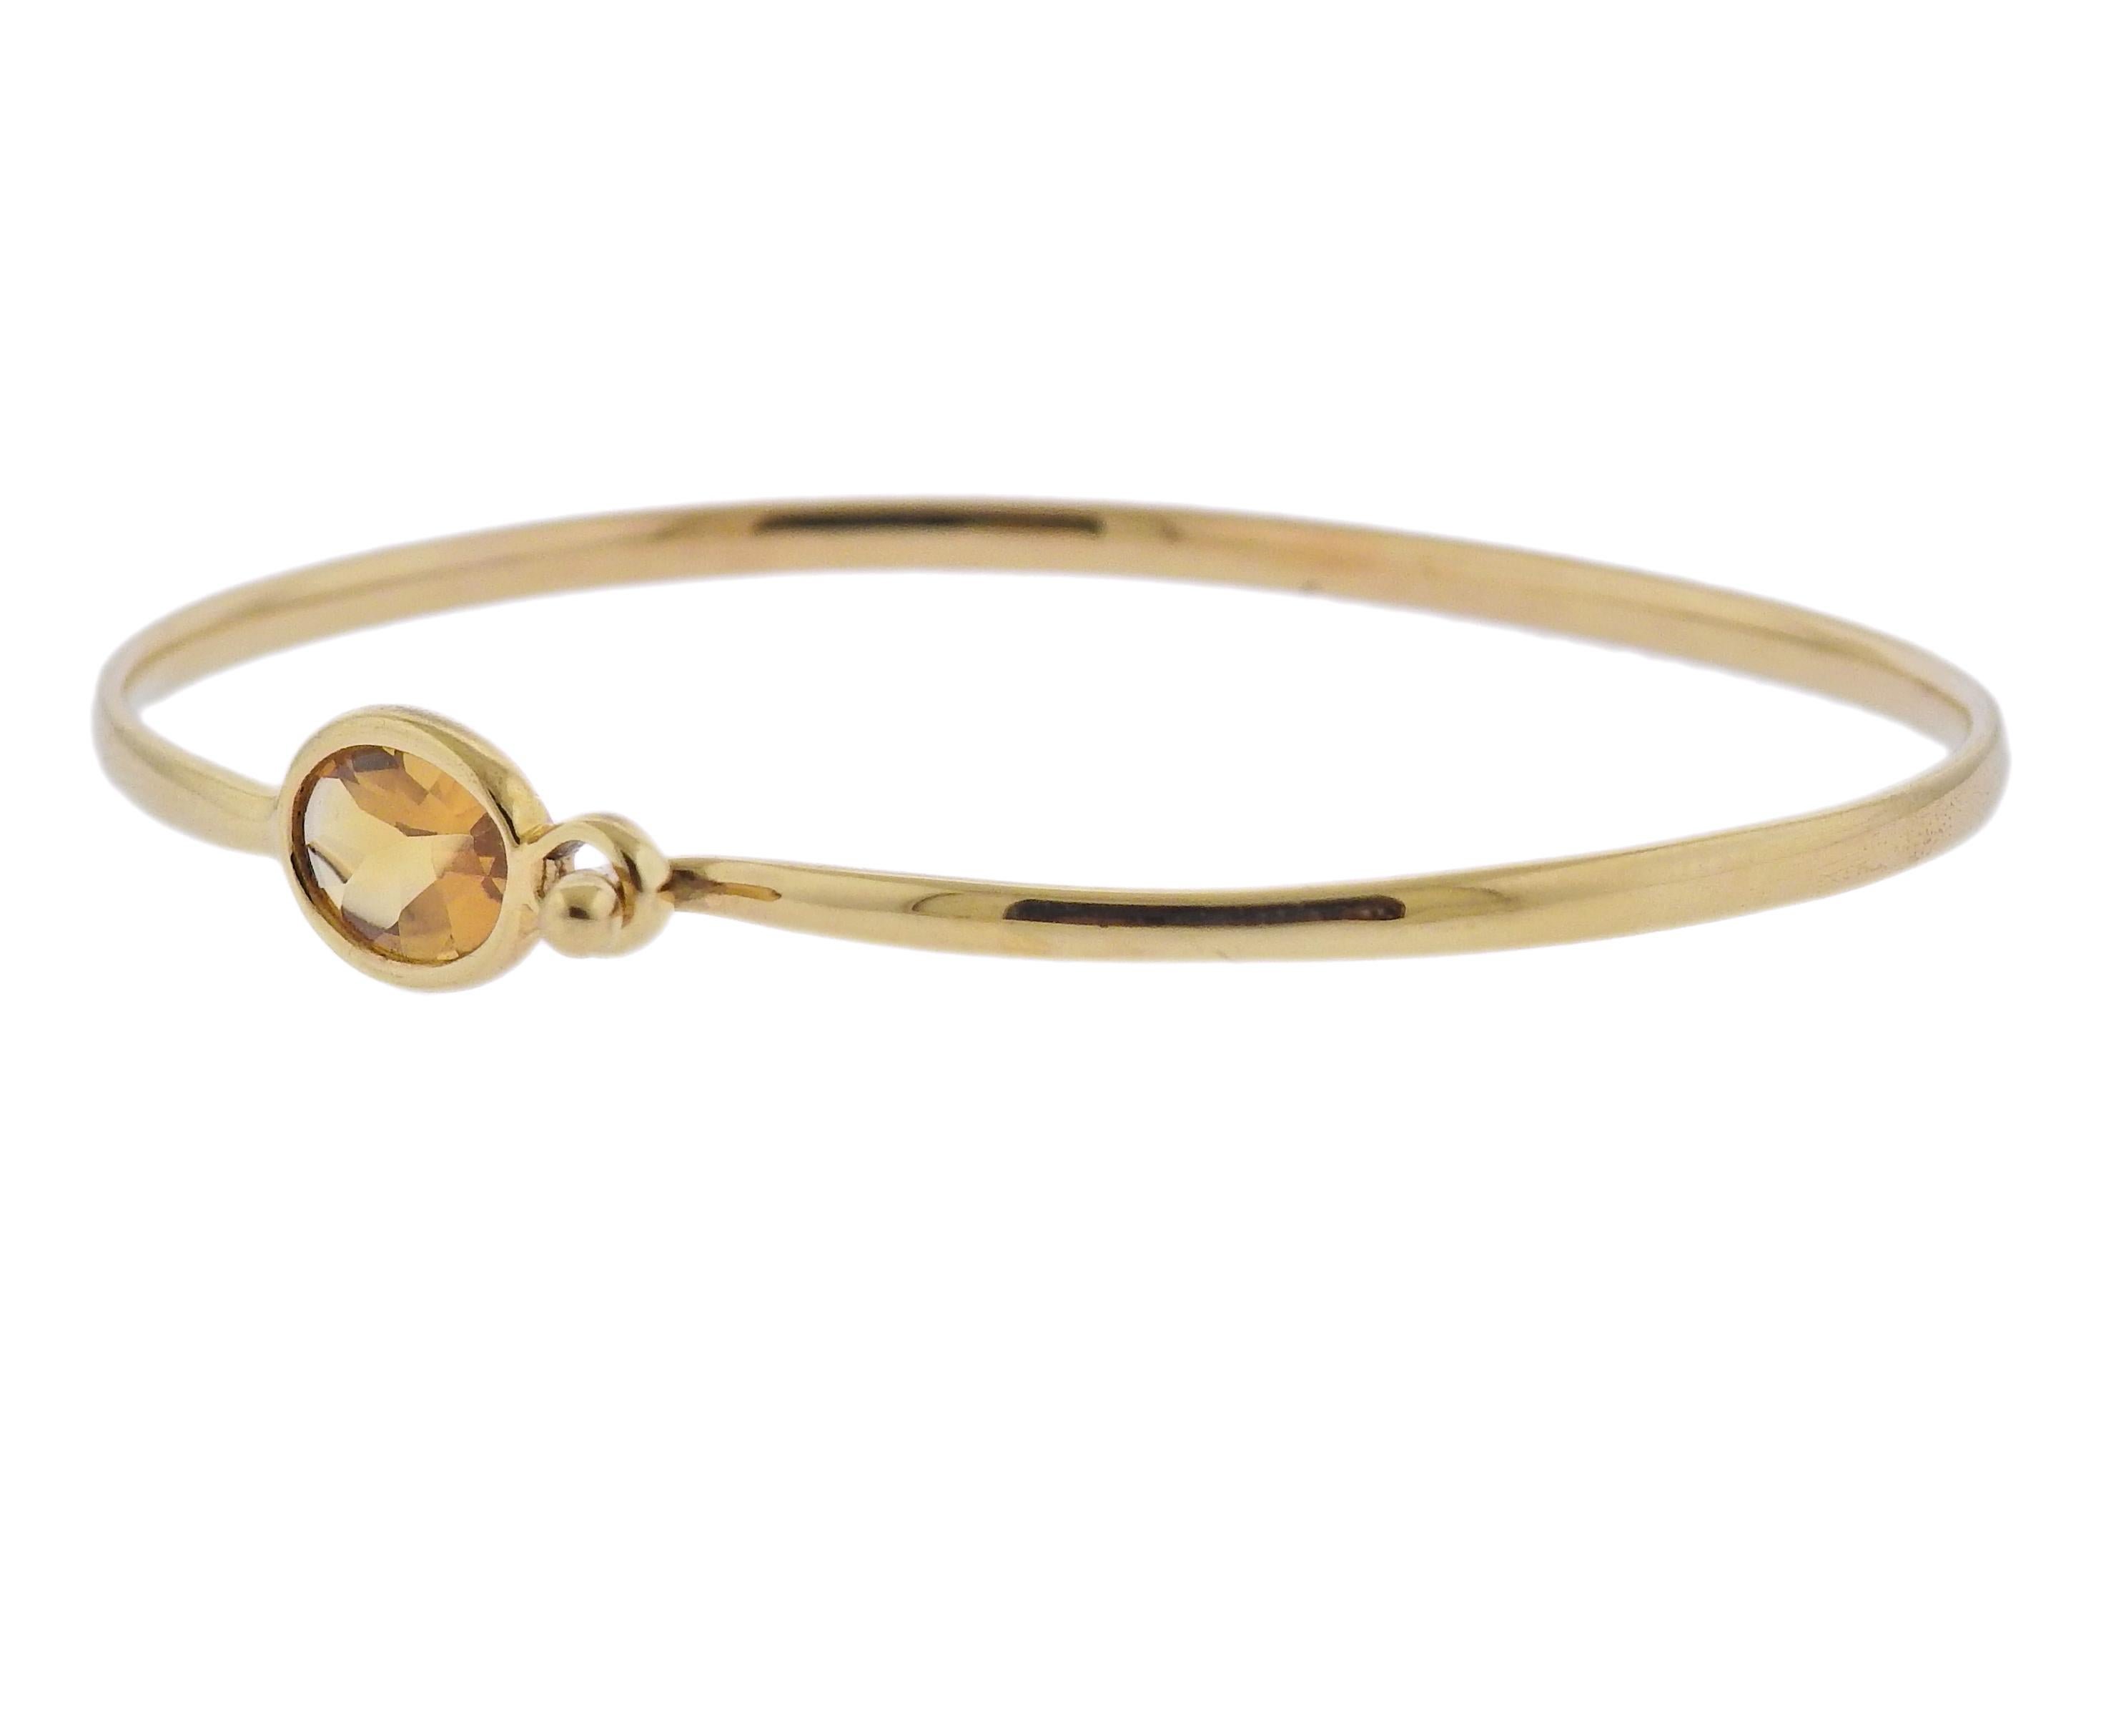 Brand new Georg Jensen 18k gold bracelet from Savannah collection with citrine. Center section measures 8 x 16mm. Available in sizes S, M and L (will fit respectively approx. 6.5